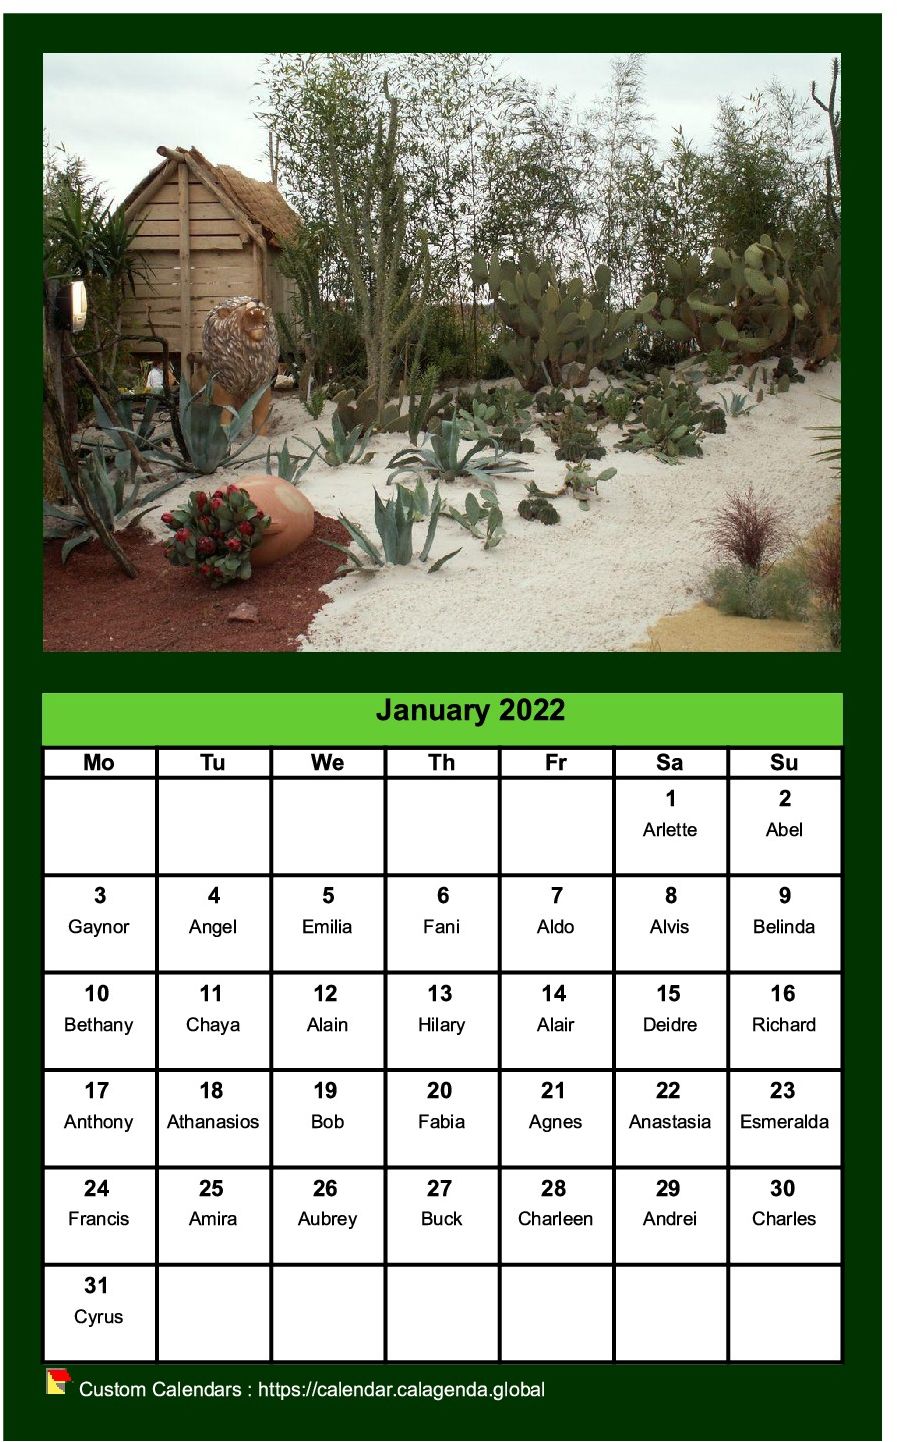 Calendar monthly 2022 with a different photo every month